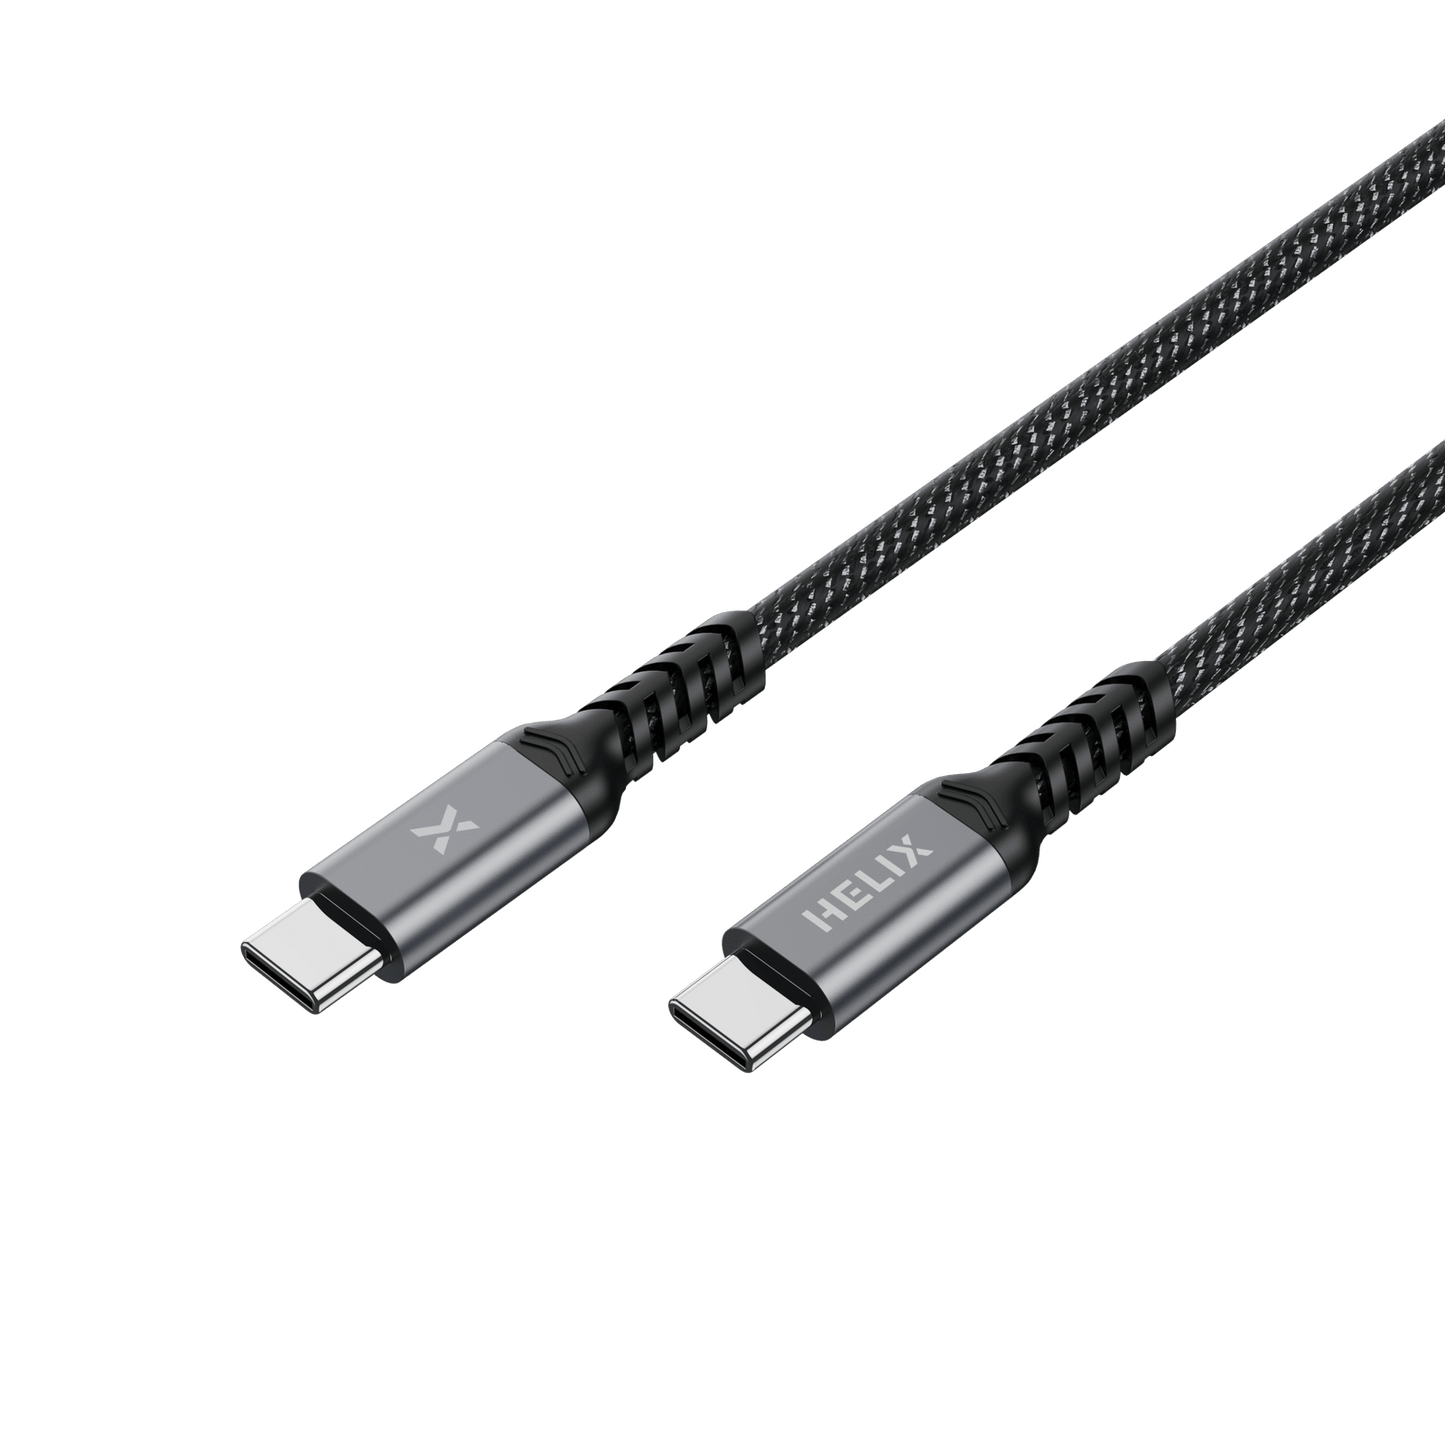 HELIX 100W USB-C to USB-C Cable With USB 3.1, PD3.0, 5A/20V, 10GBps DaHELIX USB-C to USB-C Cable 100W 2M - USB 2.0, PD3.0, Braided - BlackElevate your charging game with the HELIX USB-C to USB-C Cable. This 2-meter cable delivers a powCablesHELIXHELIX